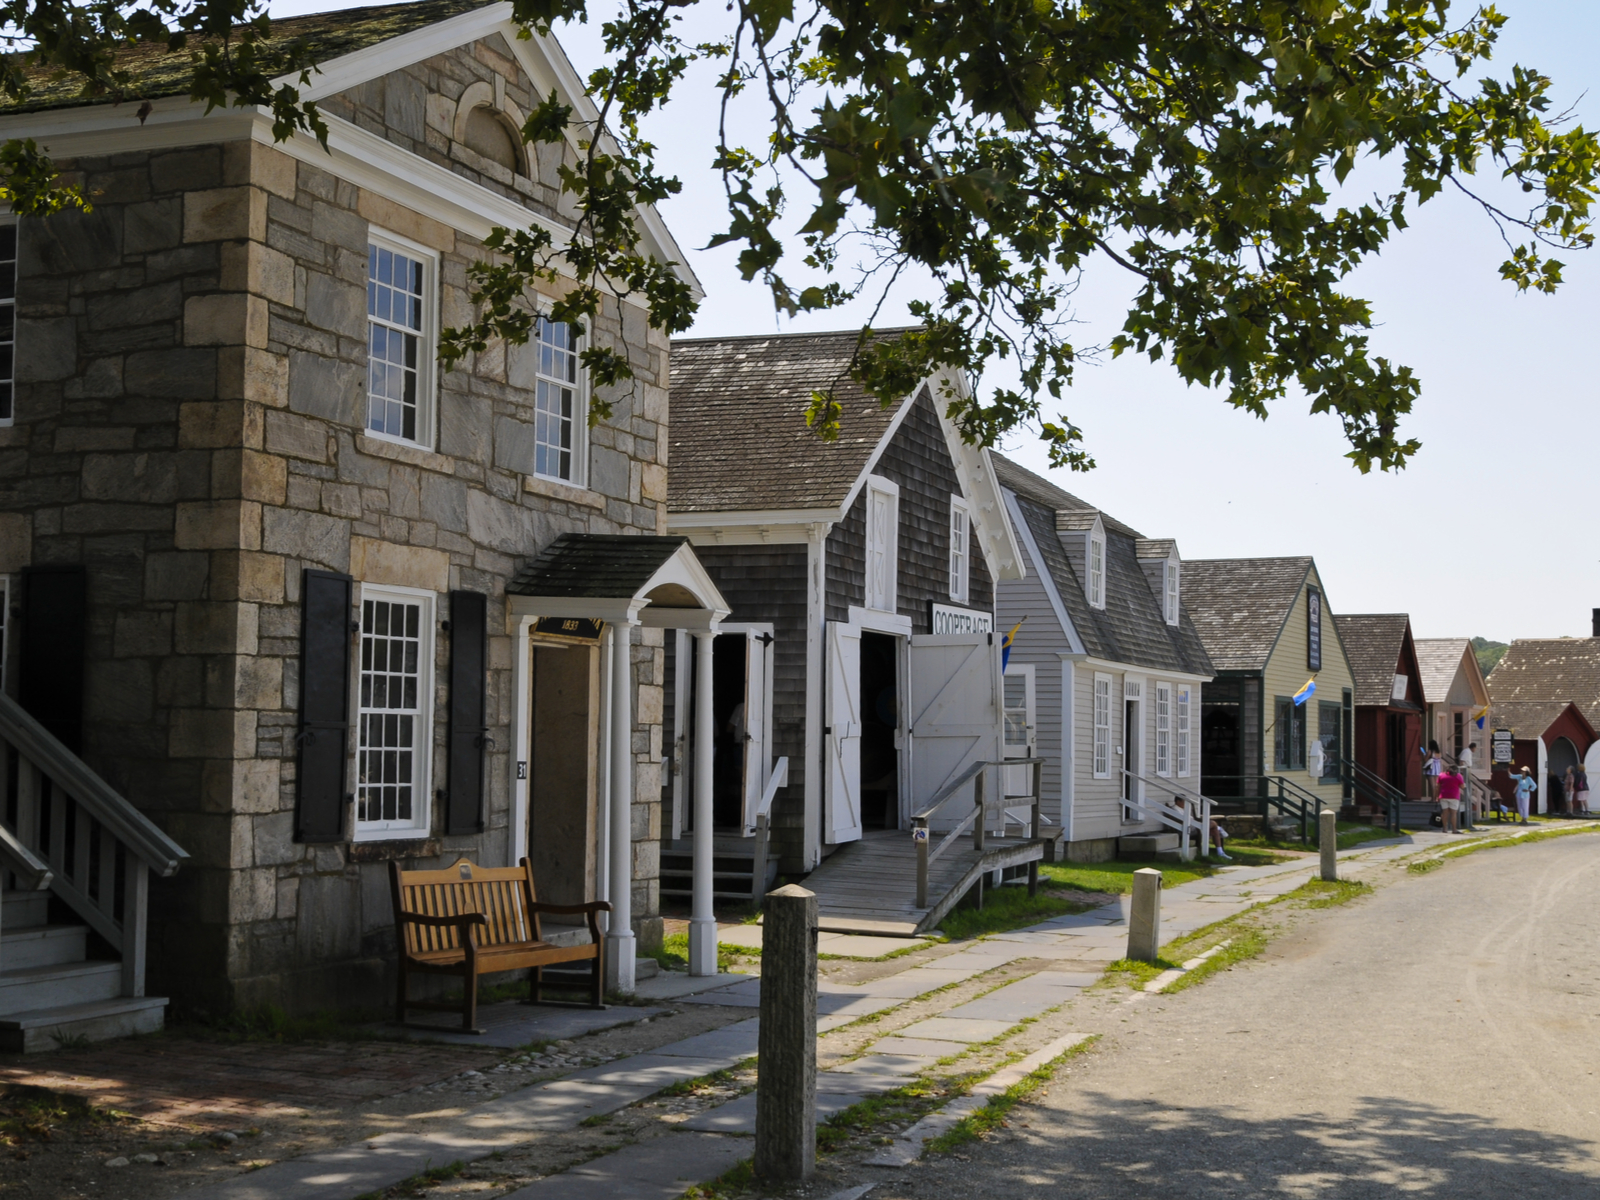 Row of houses in the Mystic Seaport in Mystic, one of the best places to rent a Connecticut Airbnb